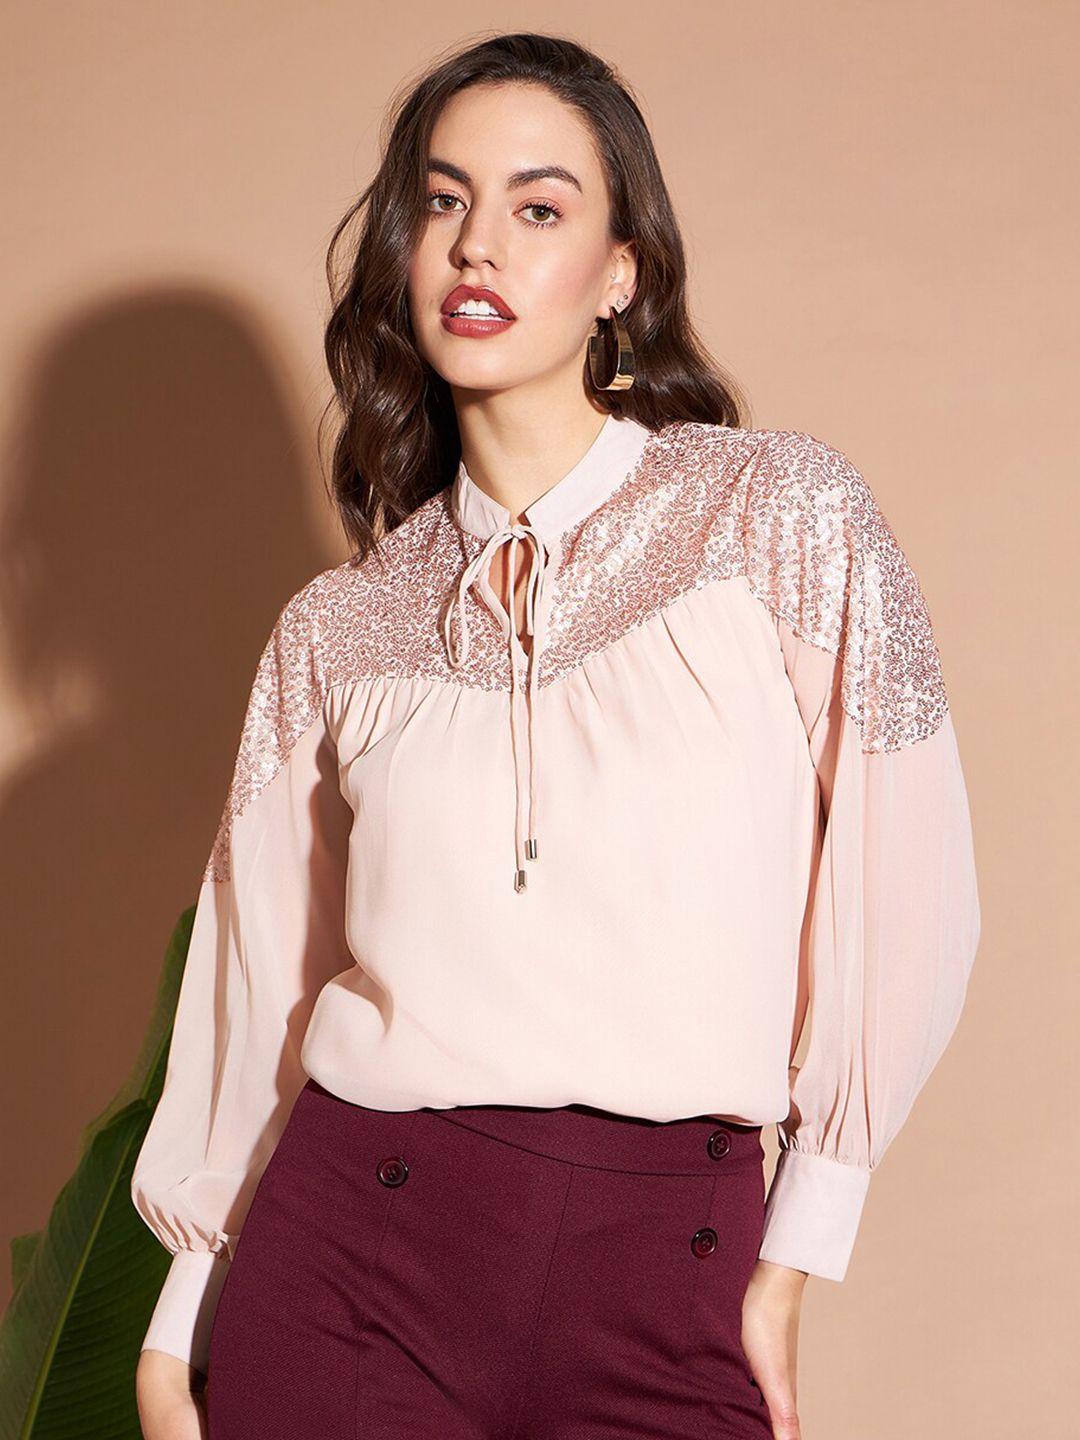 marie claire peach-coloured tie-up neck cuffed sleeves sequined regular top